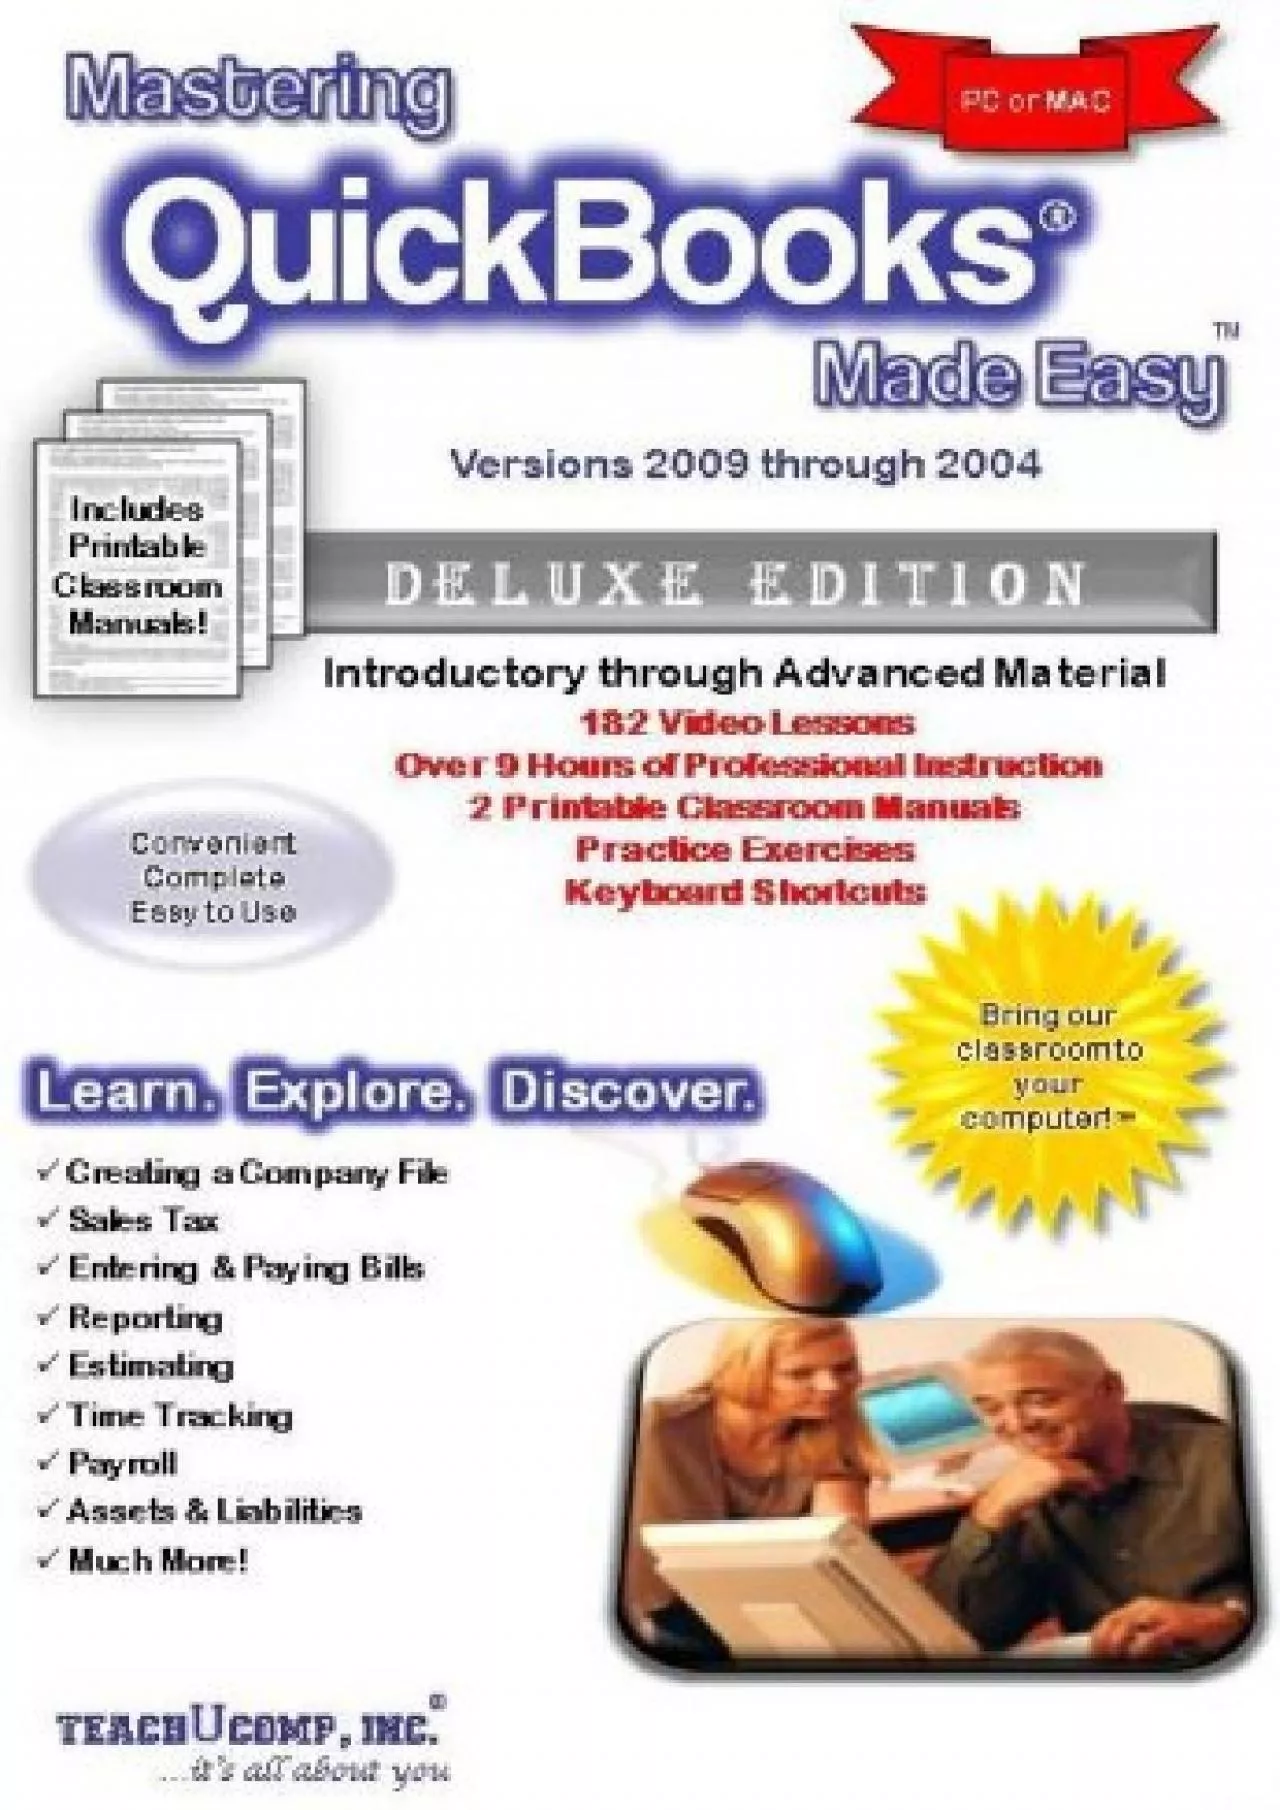 (DOWNLOAD)-Mastering QuickBooks Made Easy Training Tutorial v. 2009 through 2004 - How